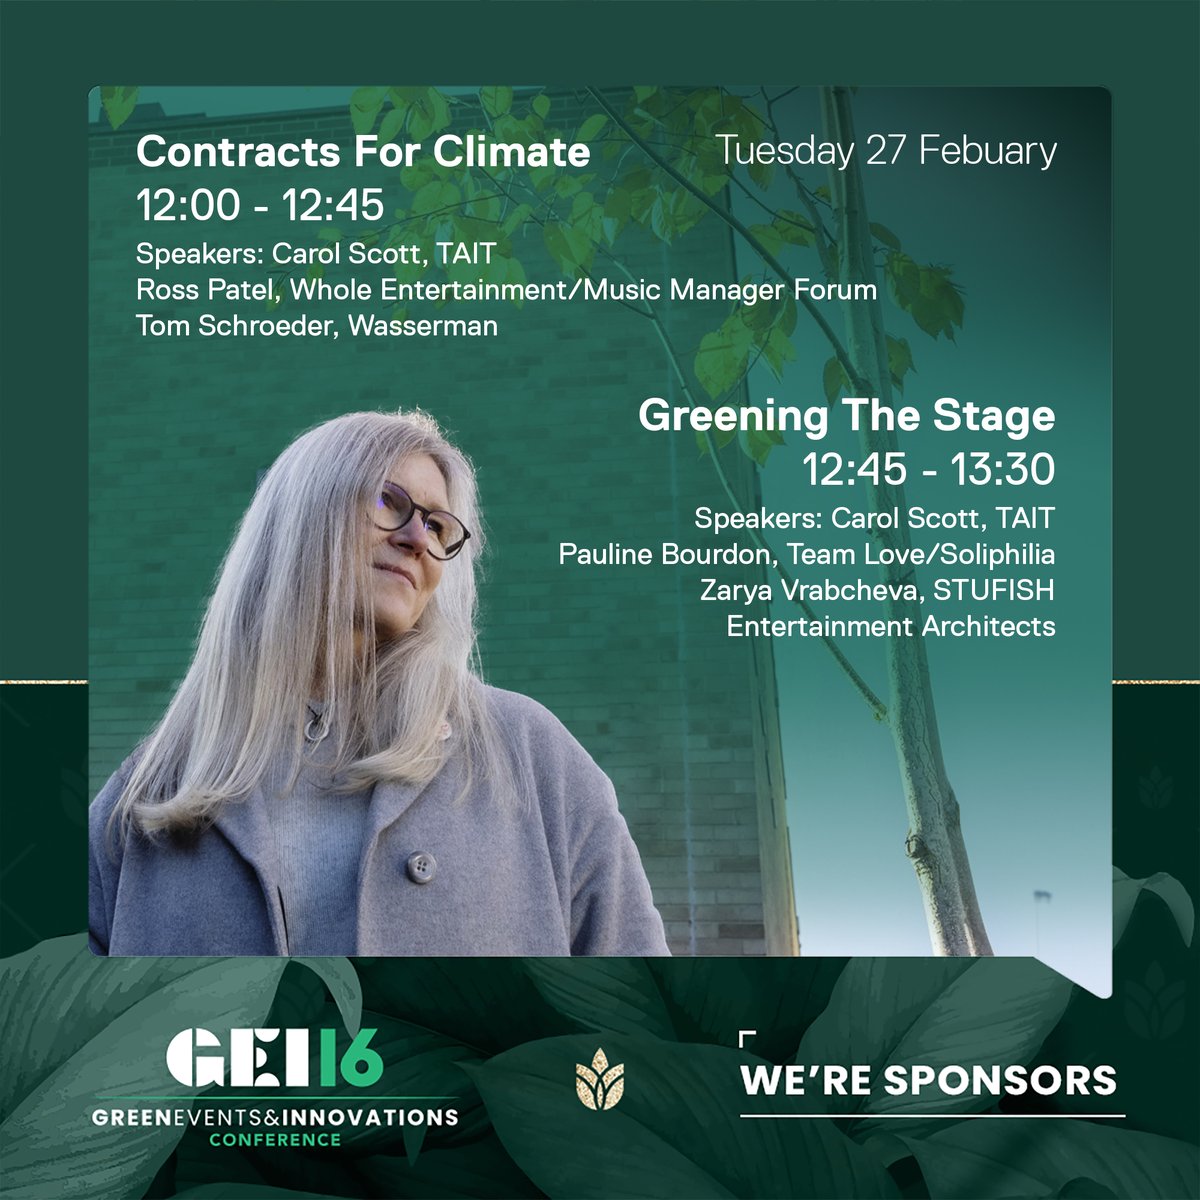 Principal Sustainability Advocate, Carol Scott, and other industry-leading players will be gathering in London today to discuss topics such as transport, energy, food, equality, inclusivity, climate justice, design & materials usage, circularity, and much more at GEI16.